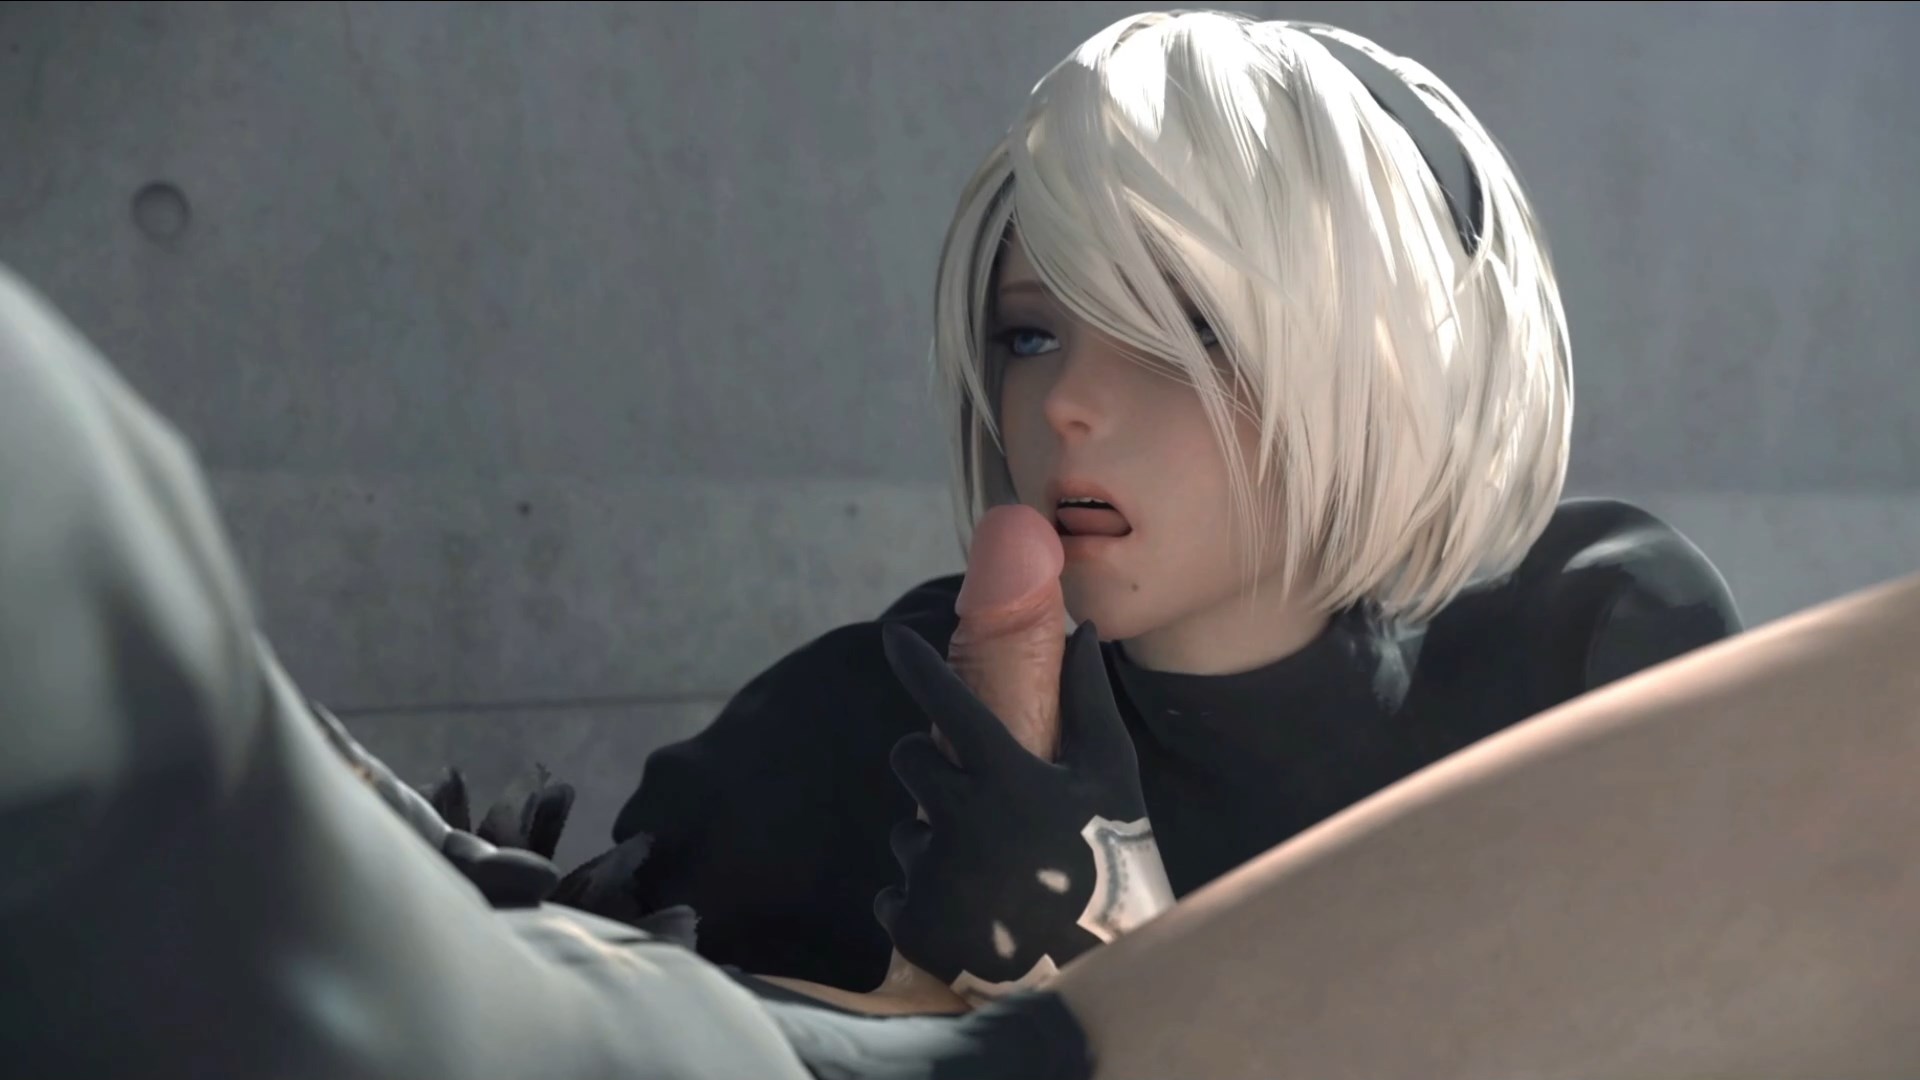 2B and 9s outdoors NIER AUTOMATA - Episode 1